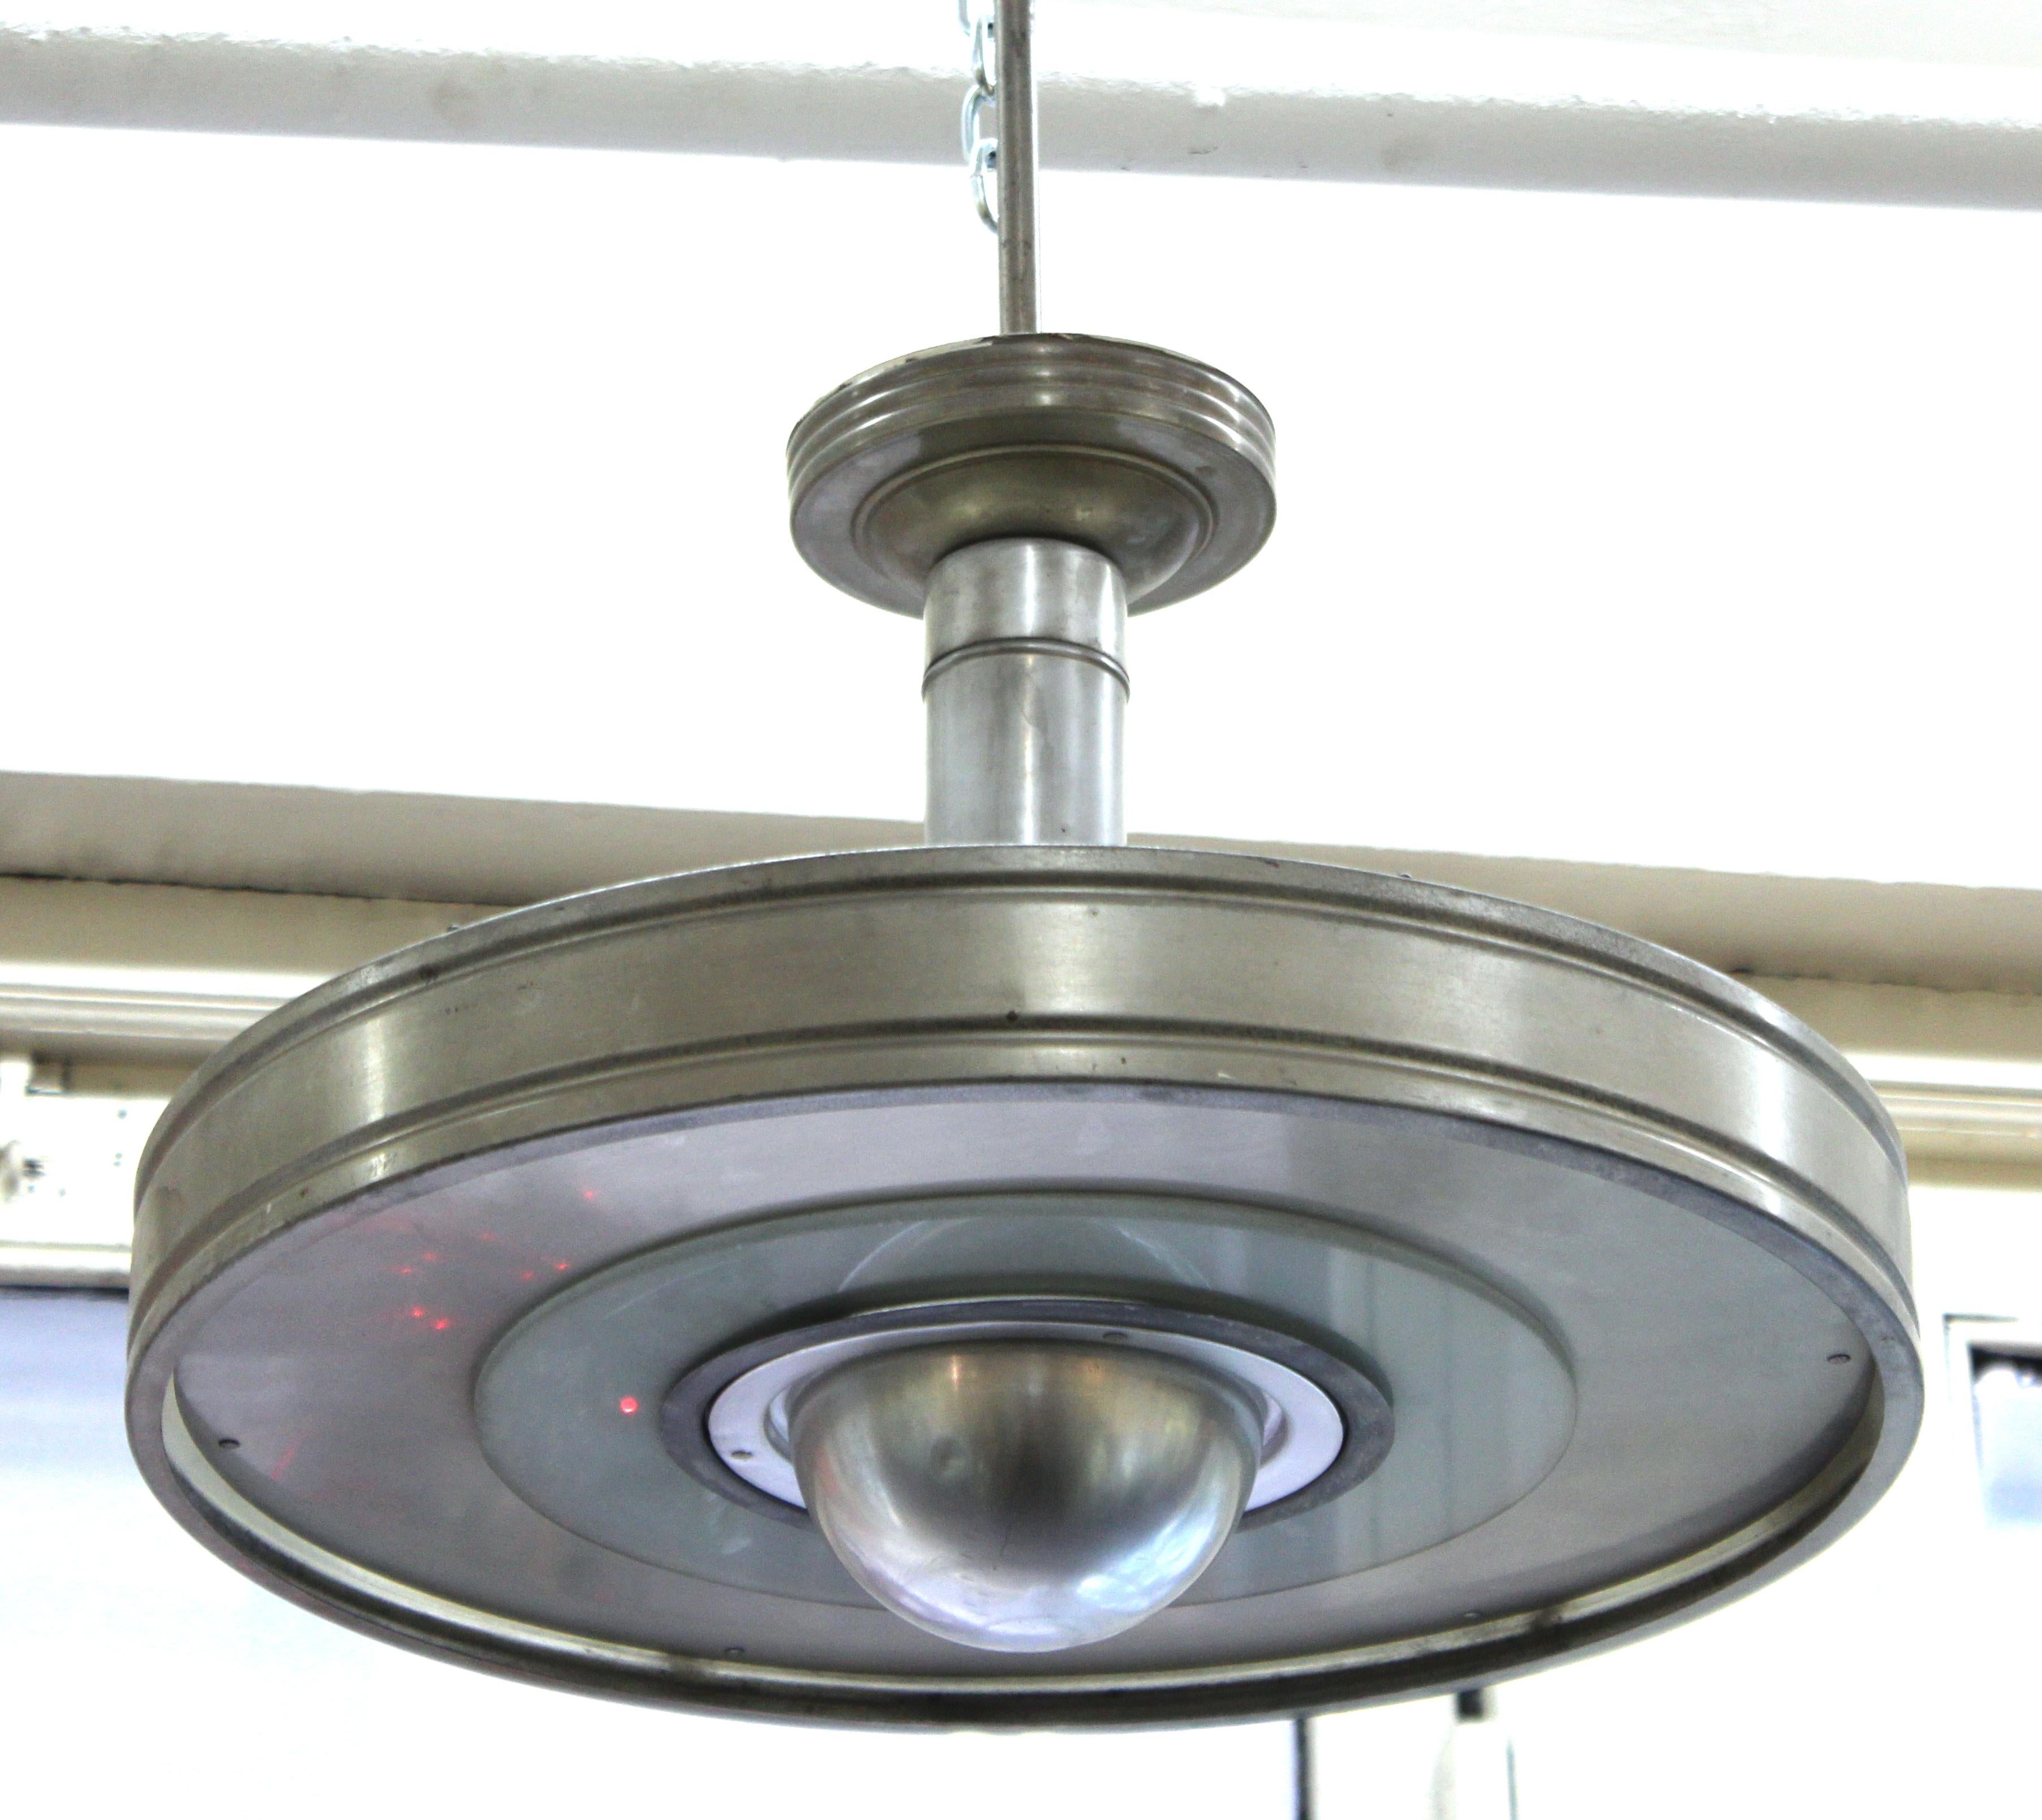 American Machine Age period ceiling pendant light made in metal and opaque glass elements. The piece was likely made in the United States during the 1930s and is in great vintage condition with age-appropriate wear.